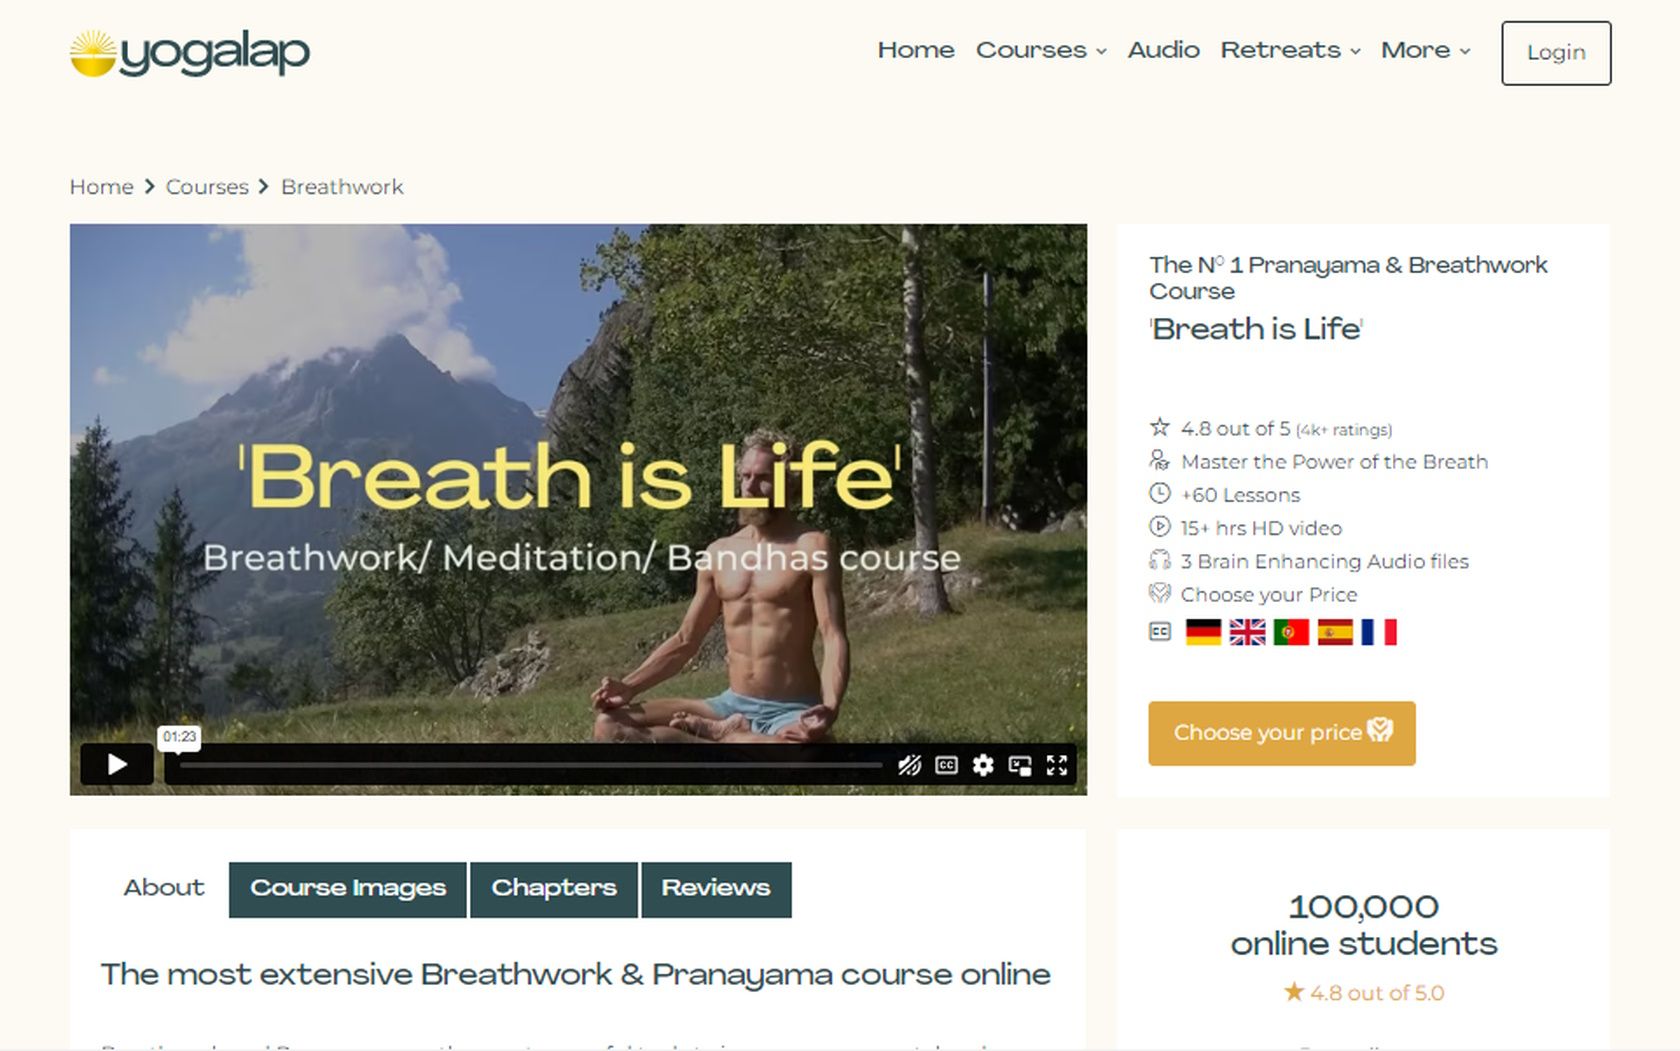 yogalap breath is life online course